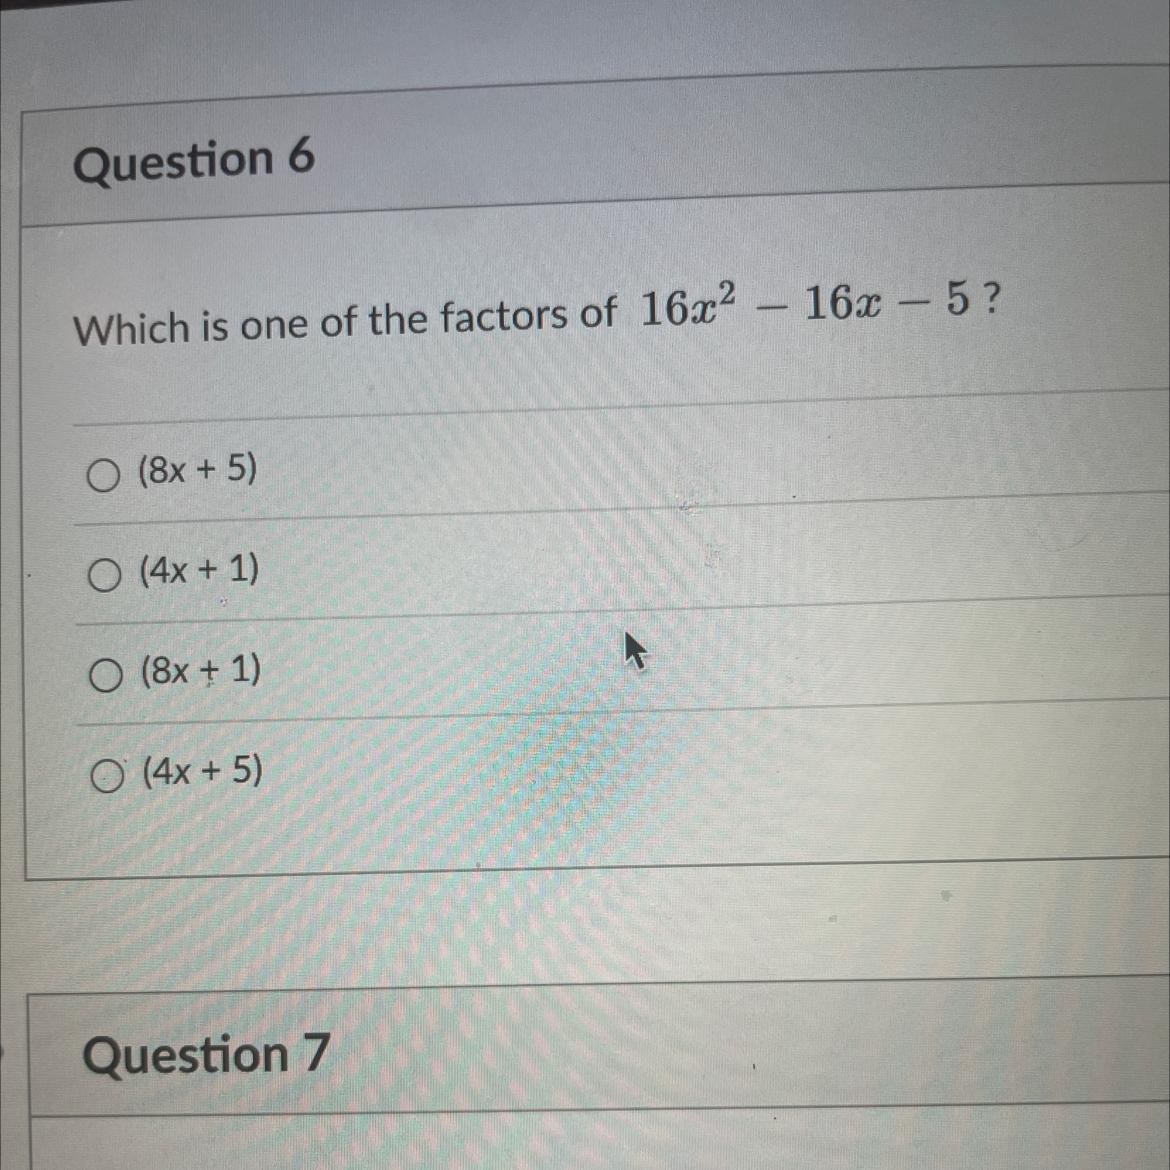 I Need Help With This Question Please. This Is Non Graded. 